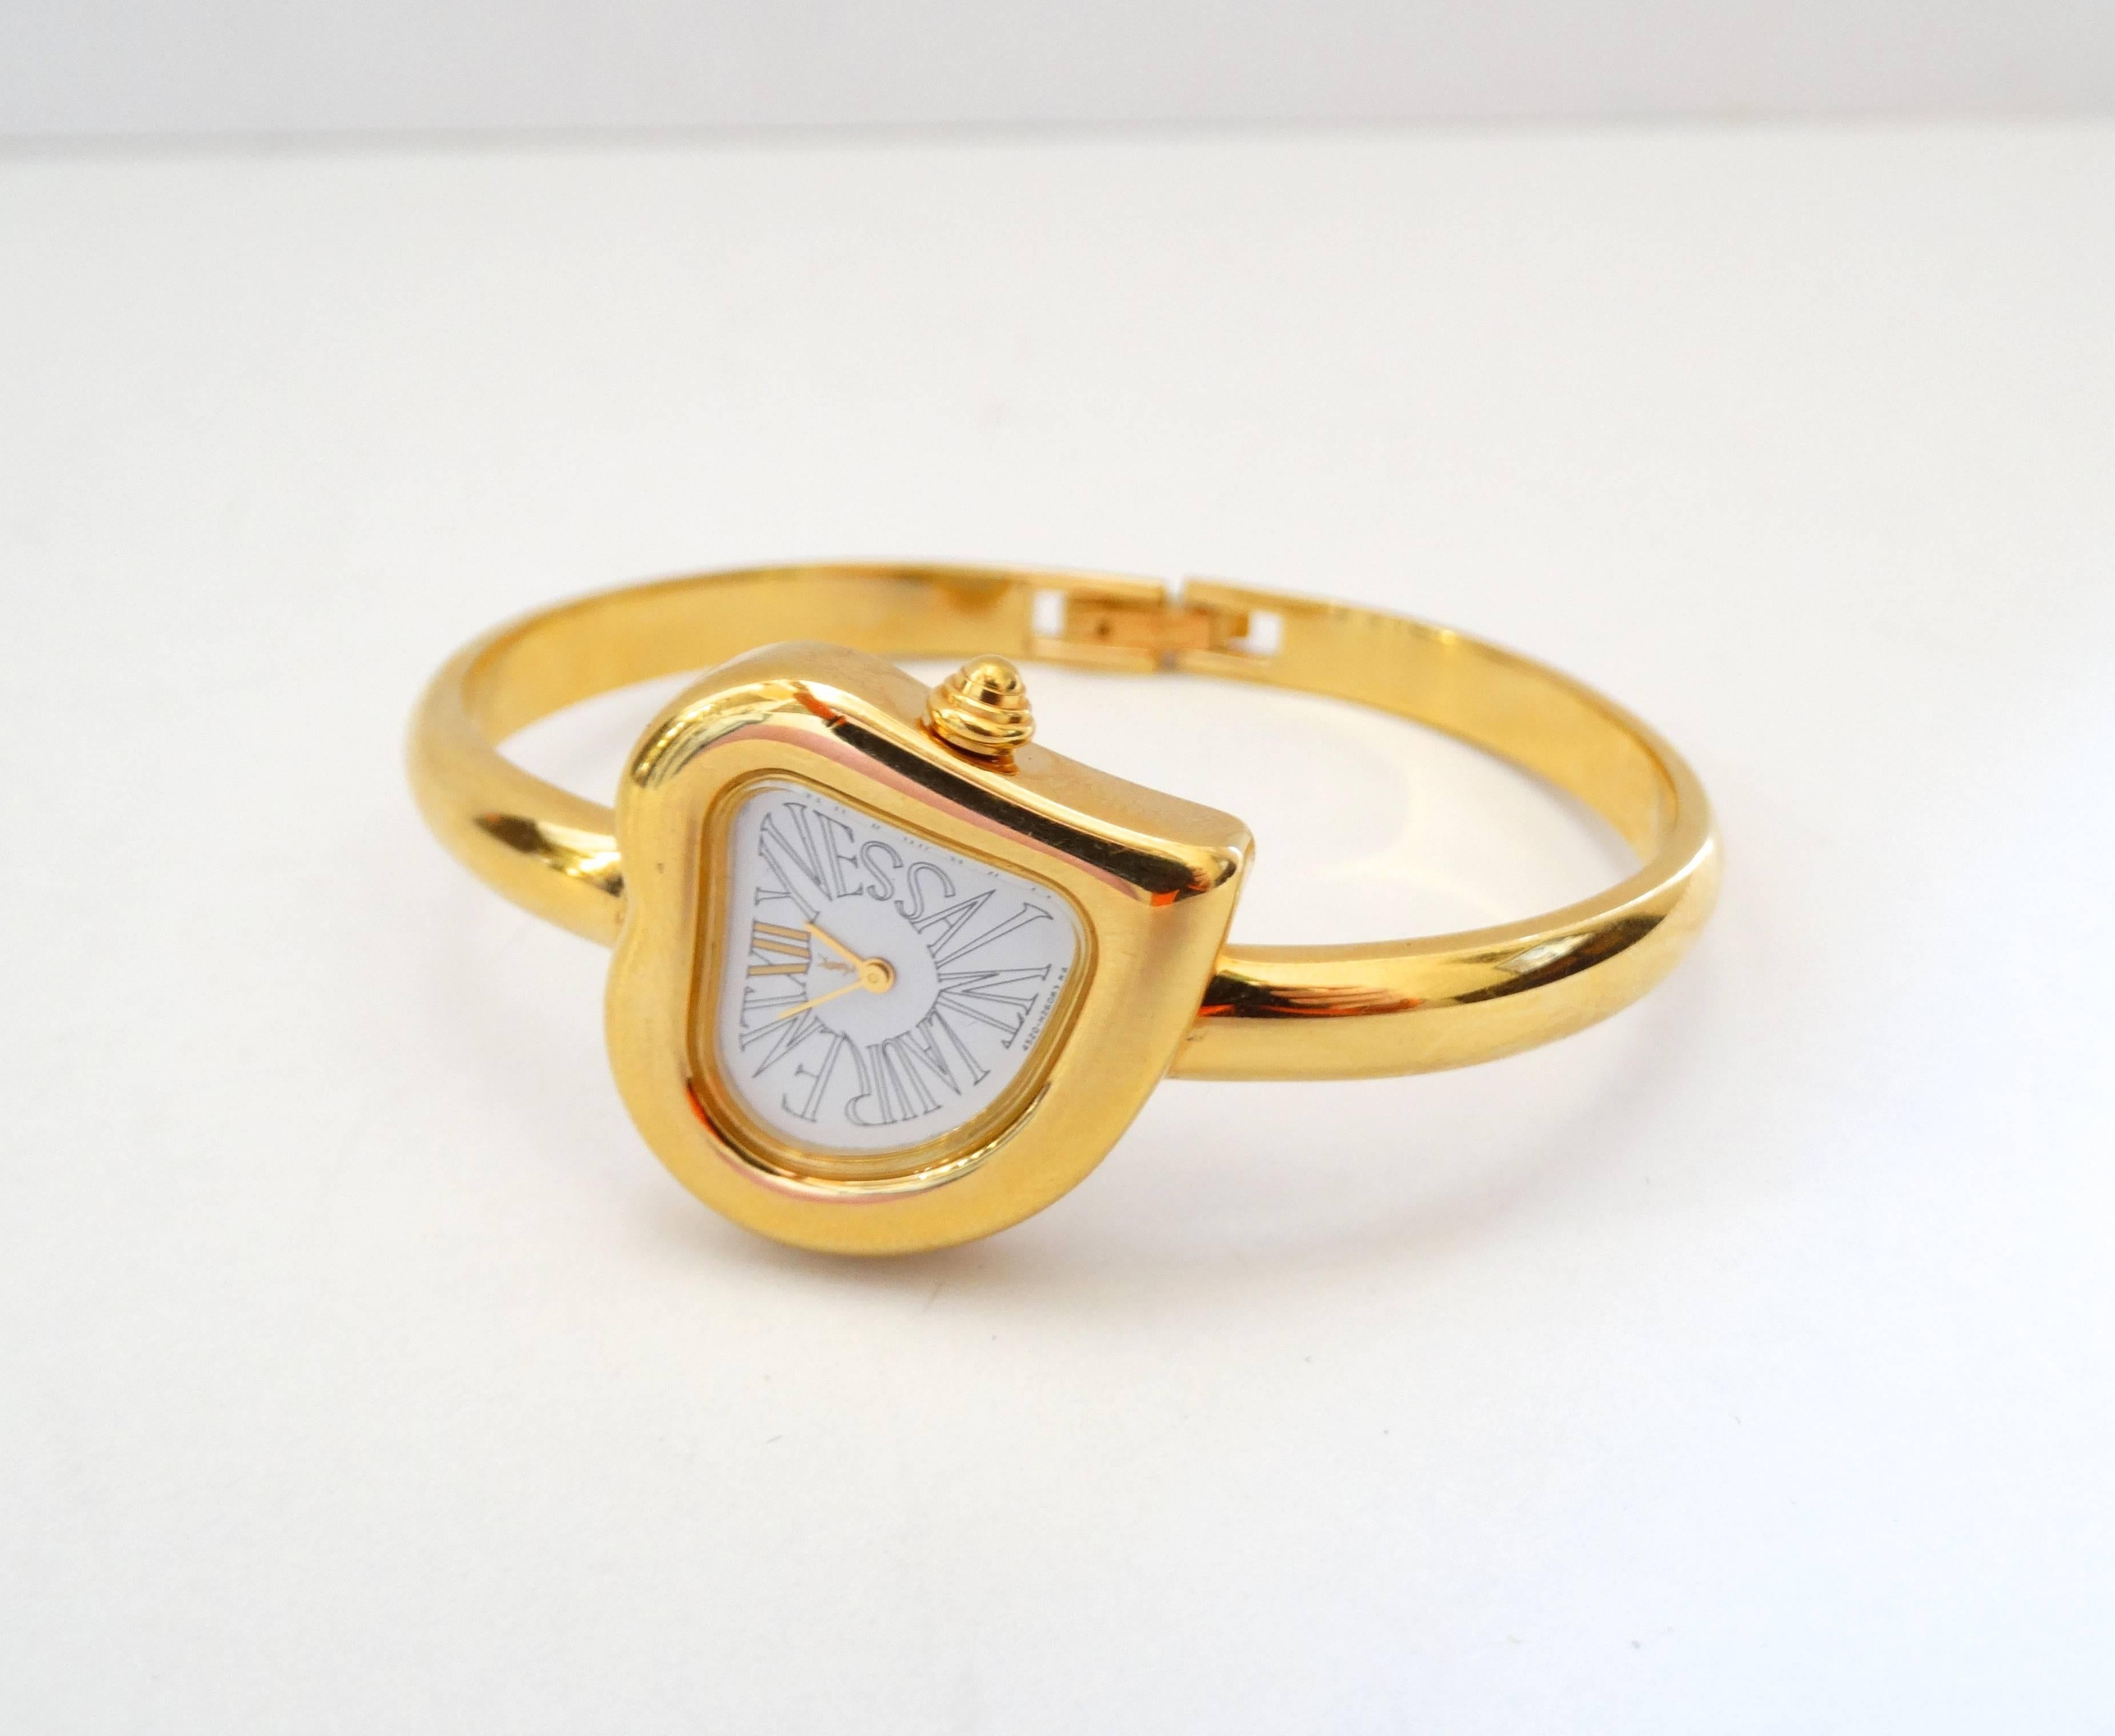 The perfect gift for your lover or even yourself this Valentines Day! Adorable Yves Saint Laurent Heart Bangle watch! Heart shaped face with YVES SAINT LAURENT spelled out in a Roman font in place of the numbers. Thin, stylish bangle style in a